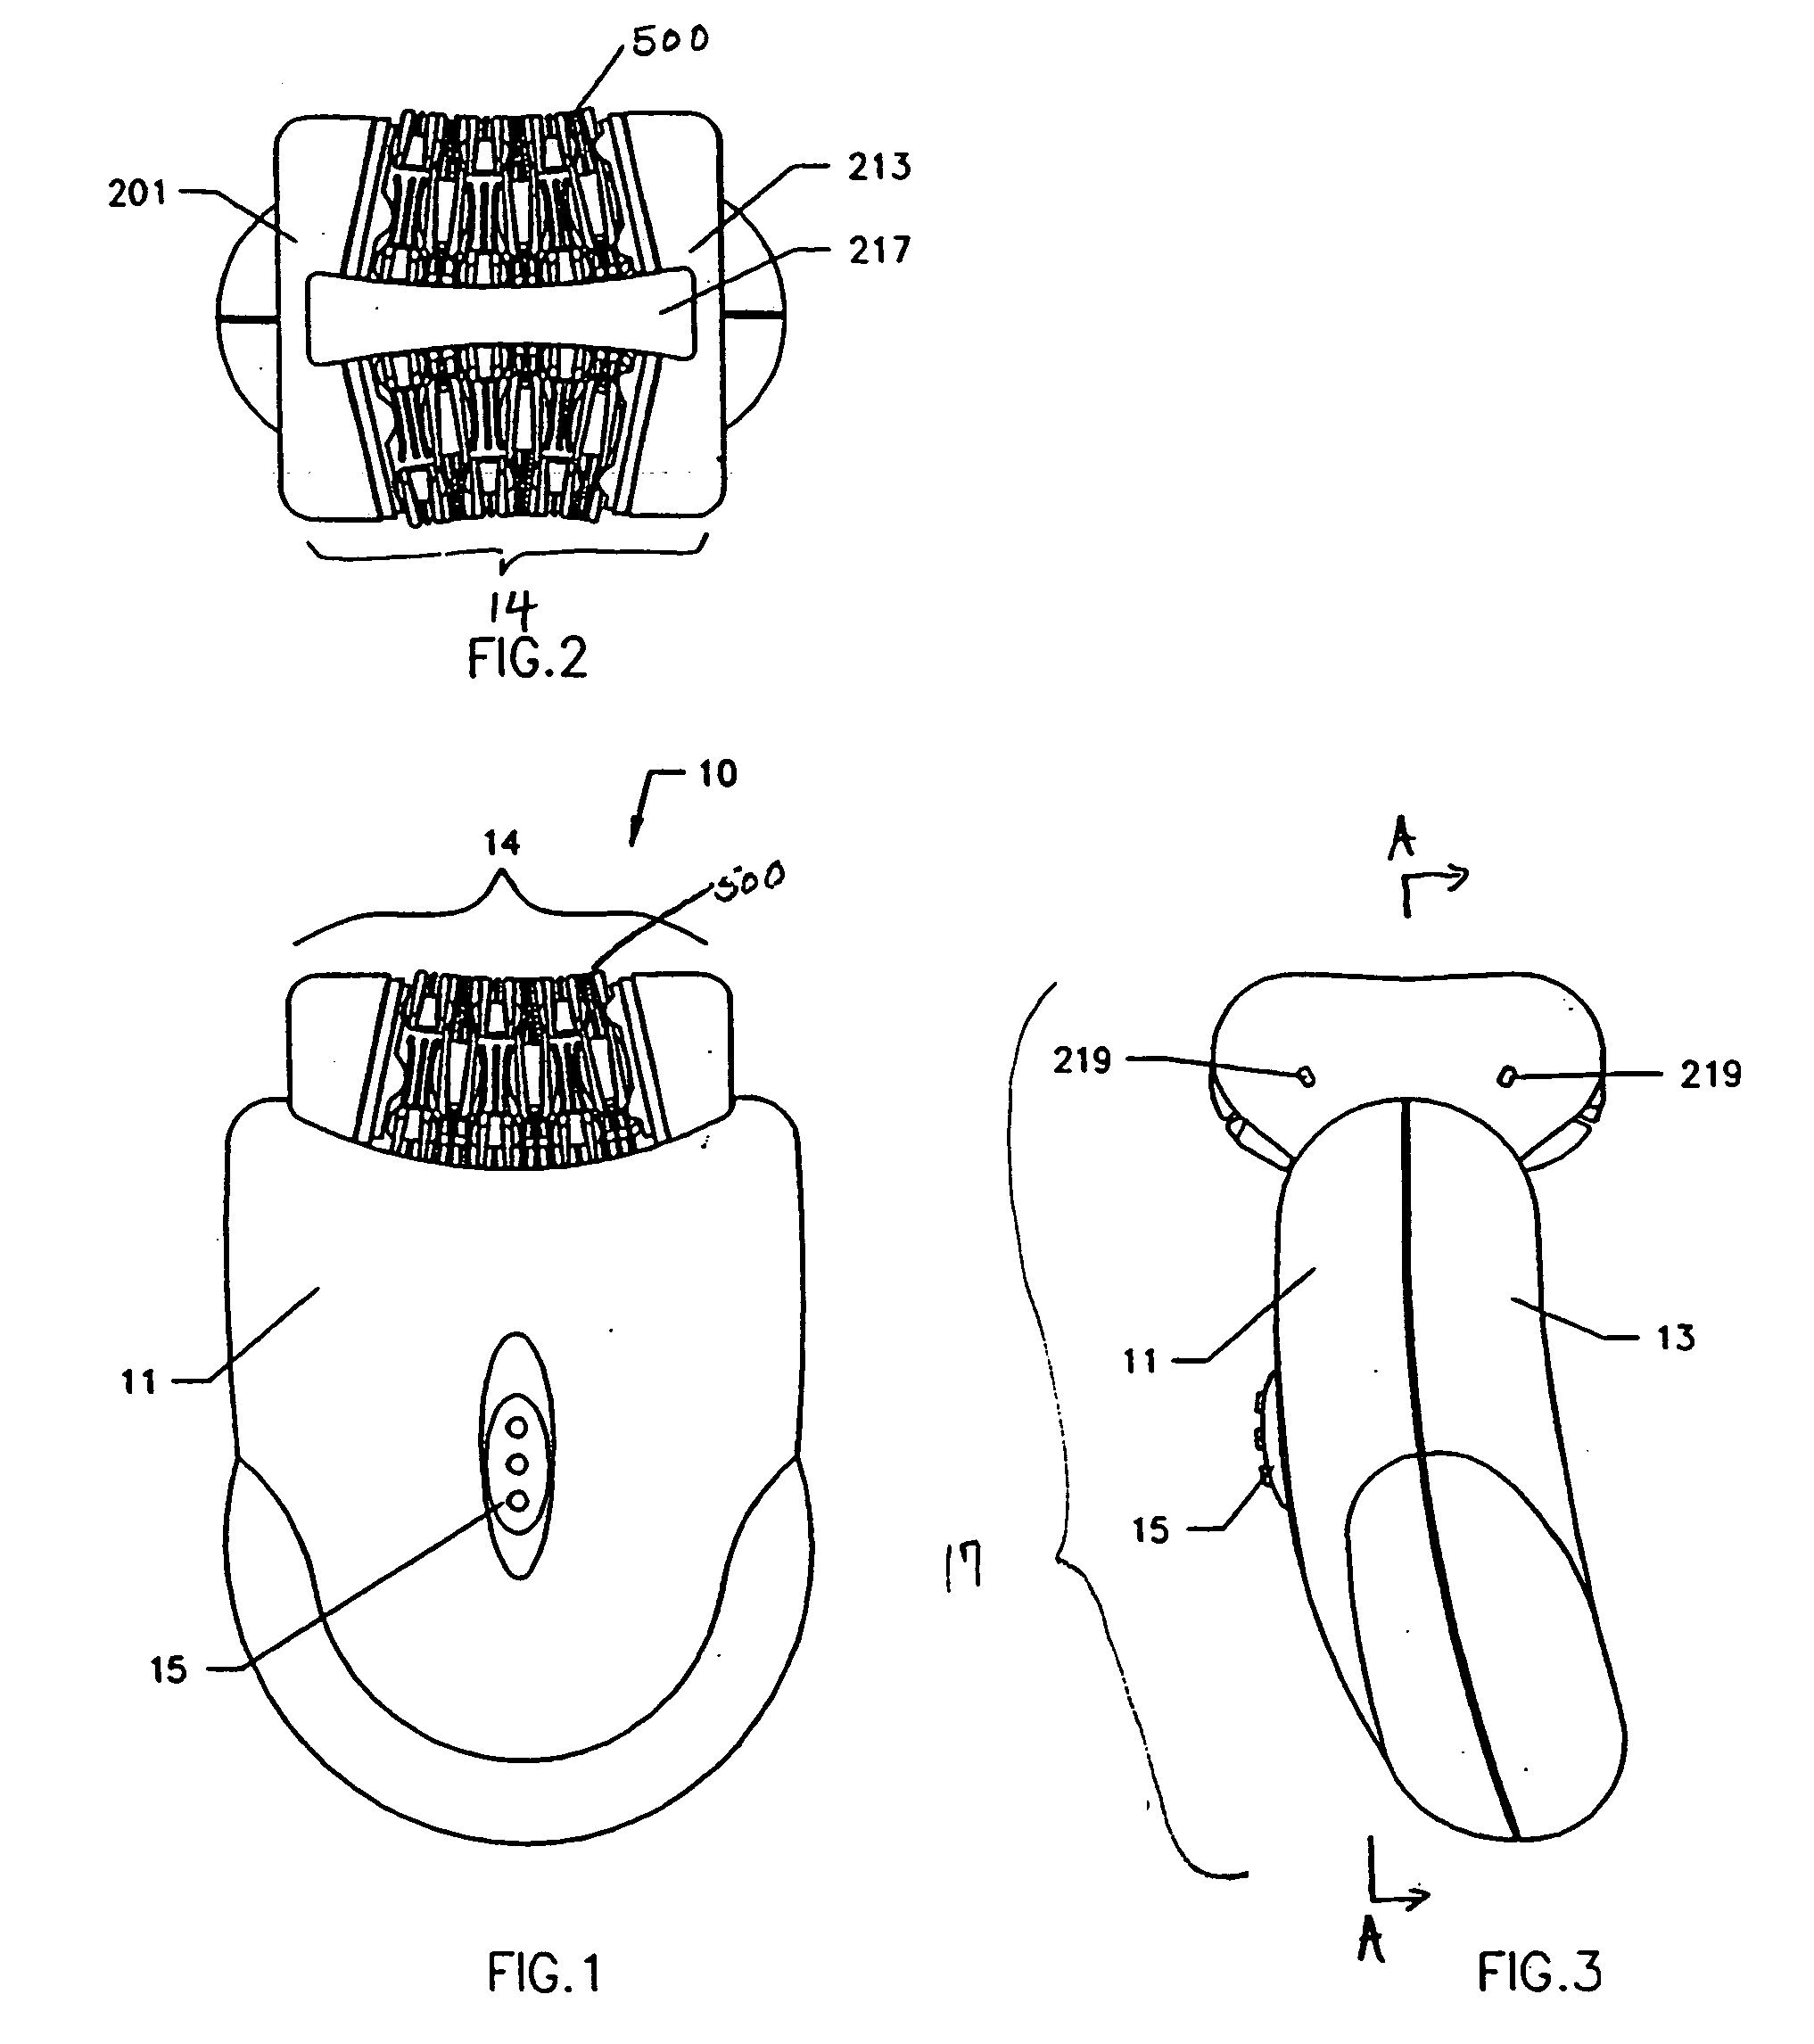 Hair removal device with disc and vibration assemblies